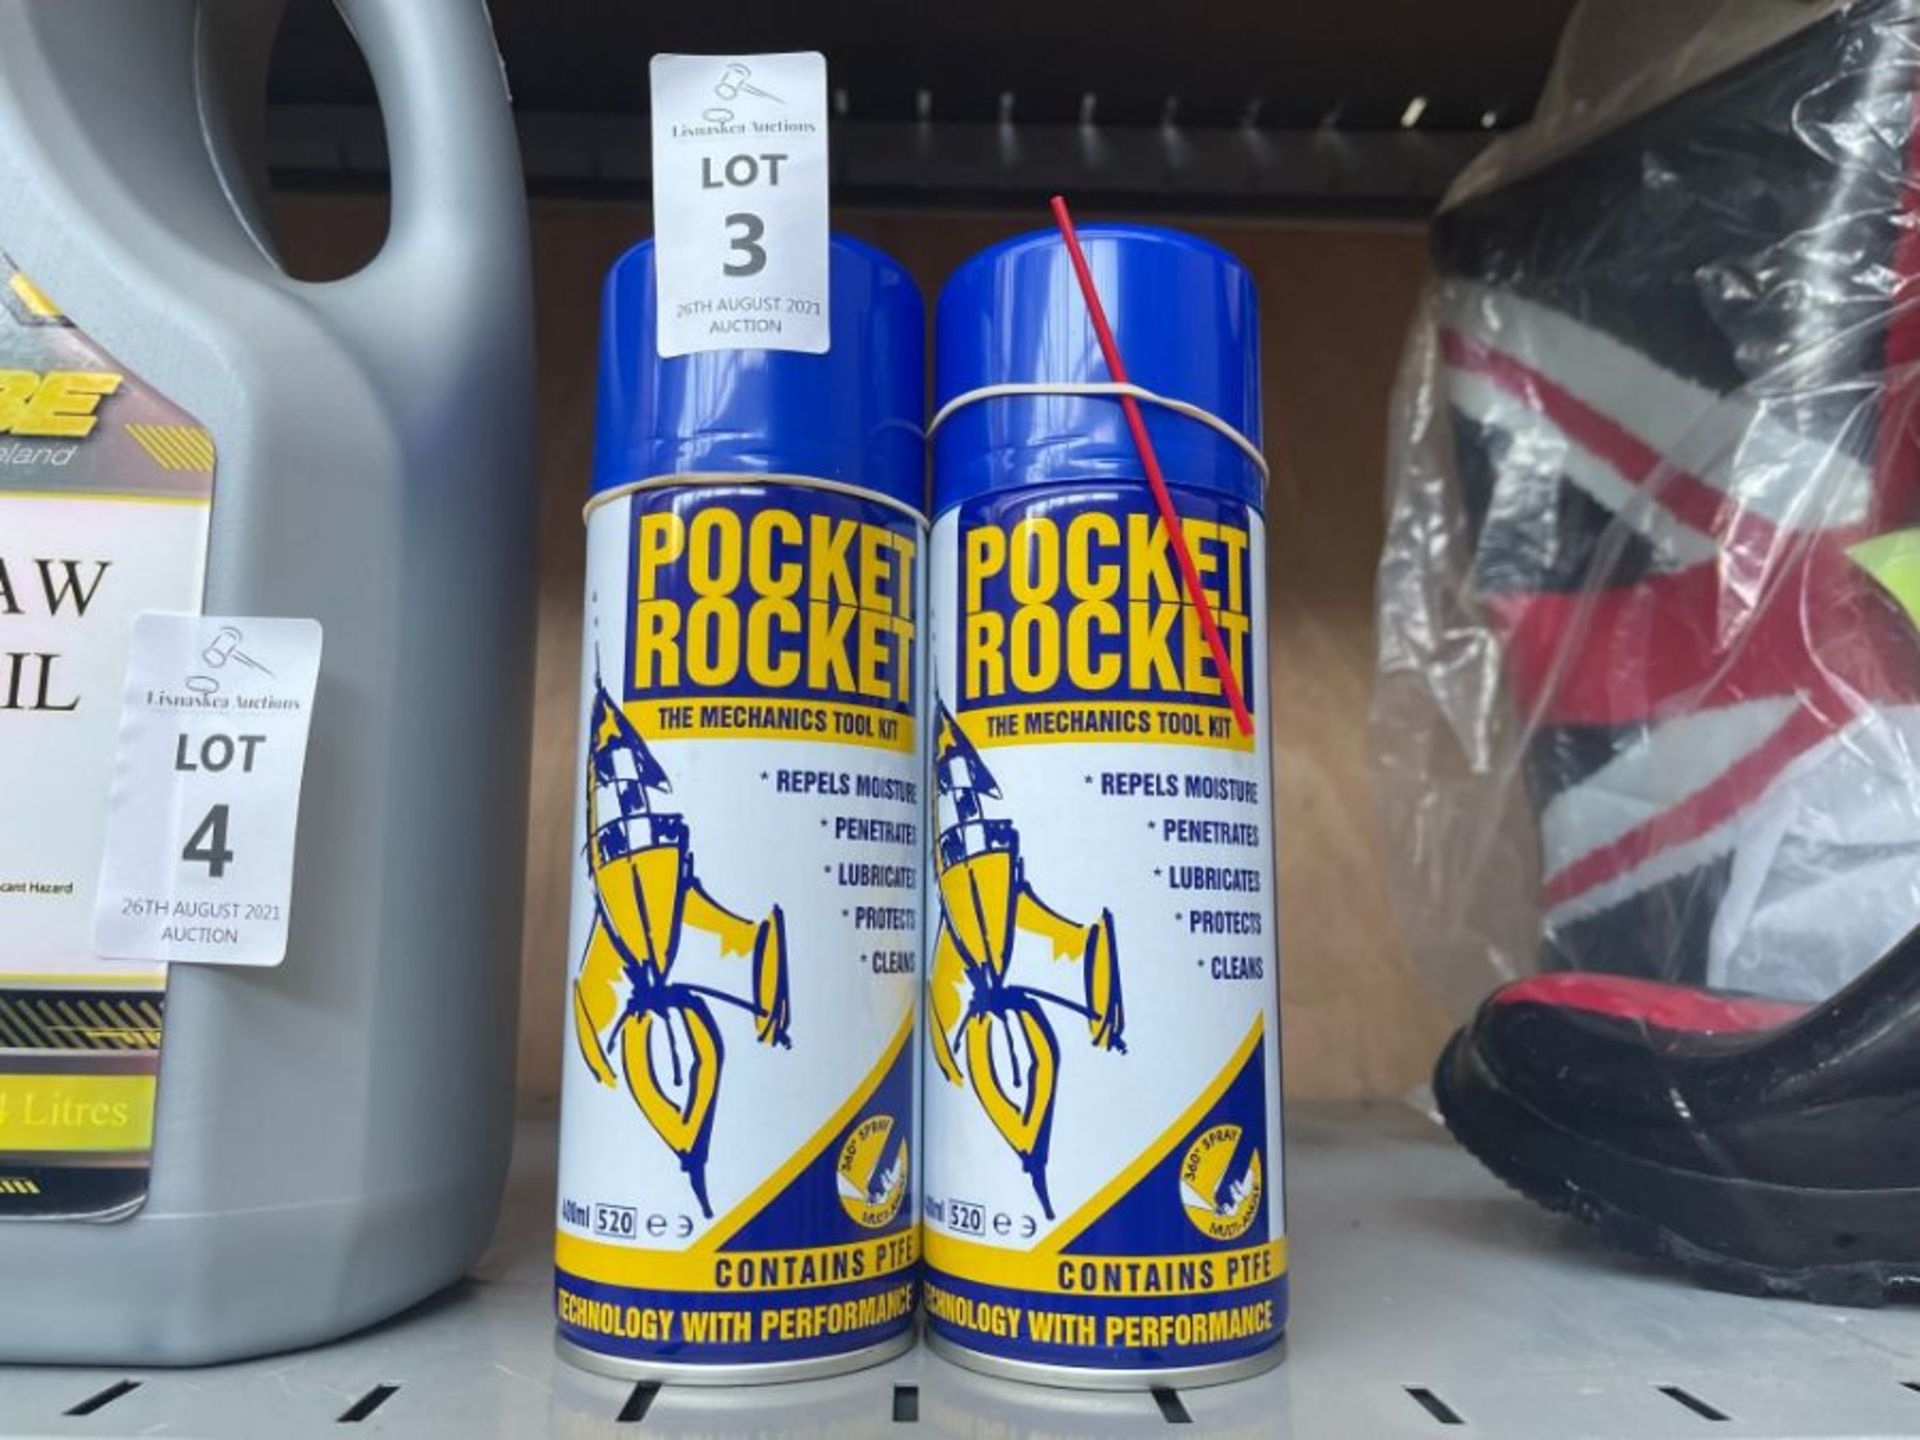 2X CANS OF POCKET ROCKET LUBRICANT